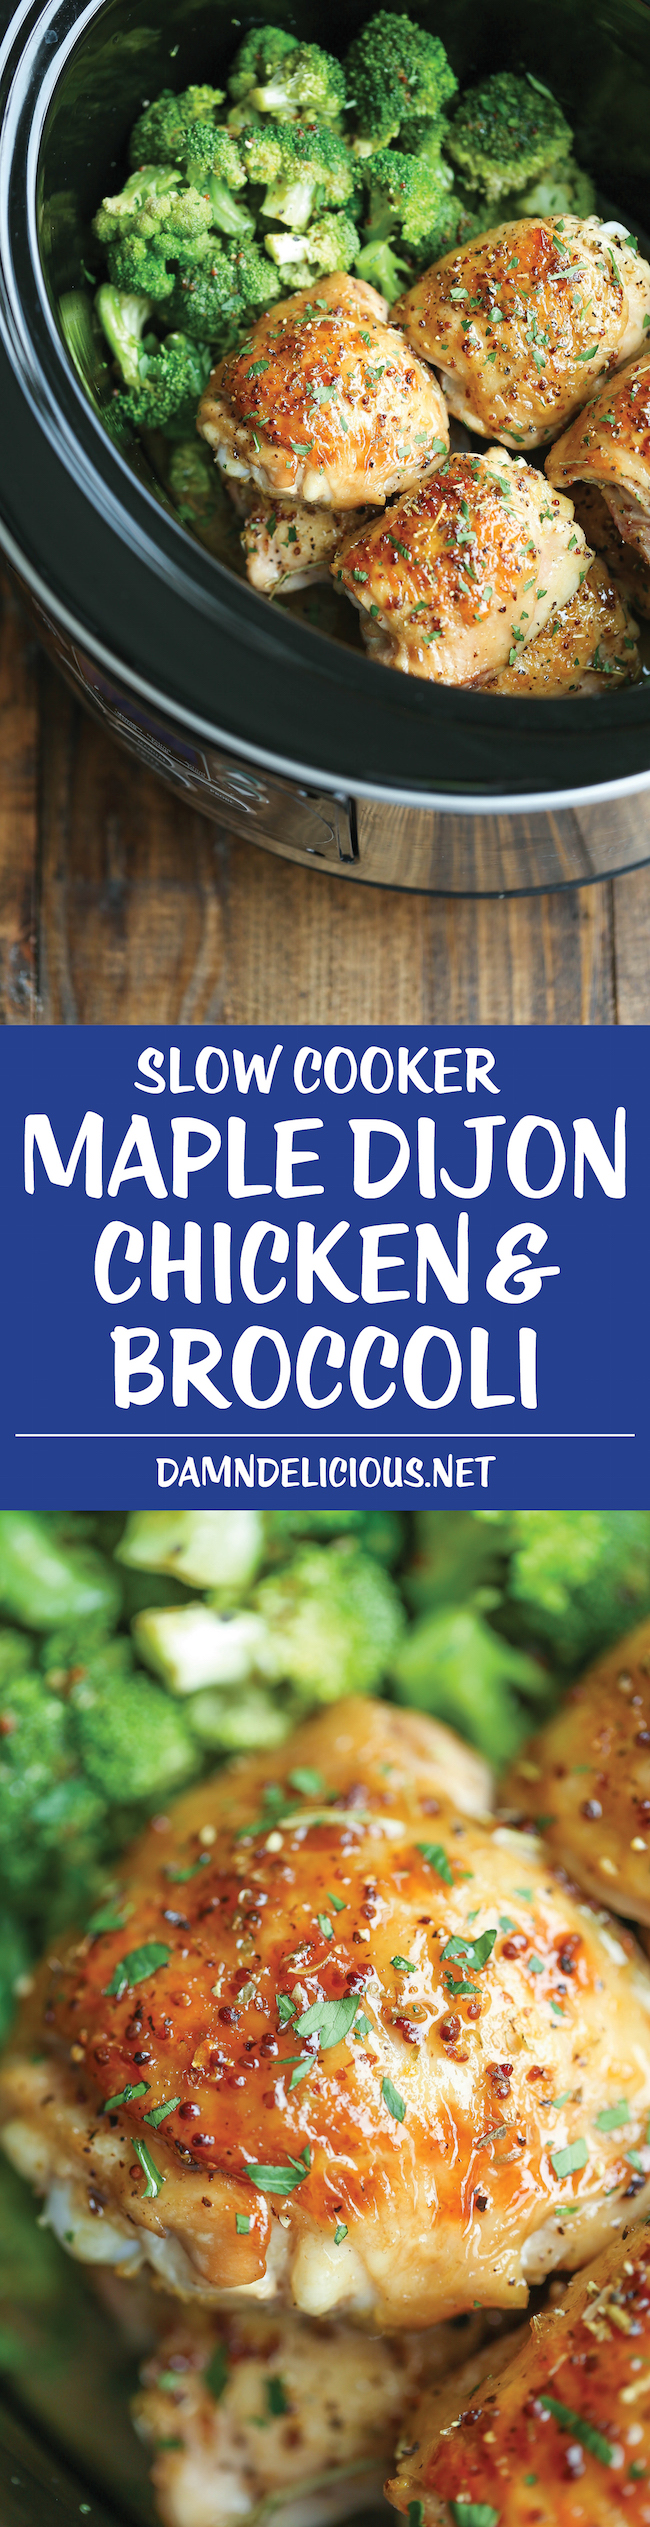 Slow Cooker Maple Dijon Chicken and Broccoli - Sweet, tangy and packed with so much flavor, made right in your crockpot! It just doesn't get any easier!